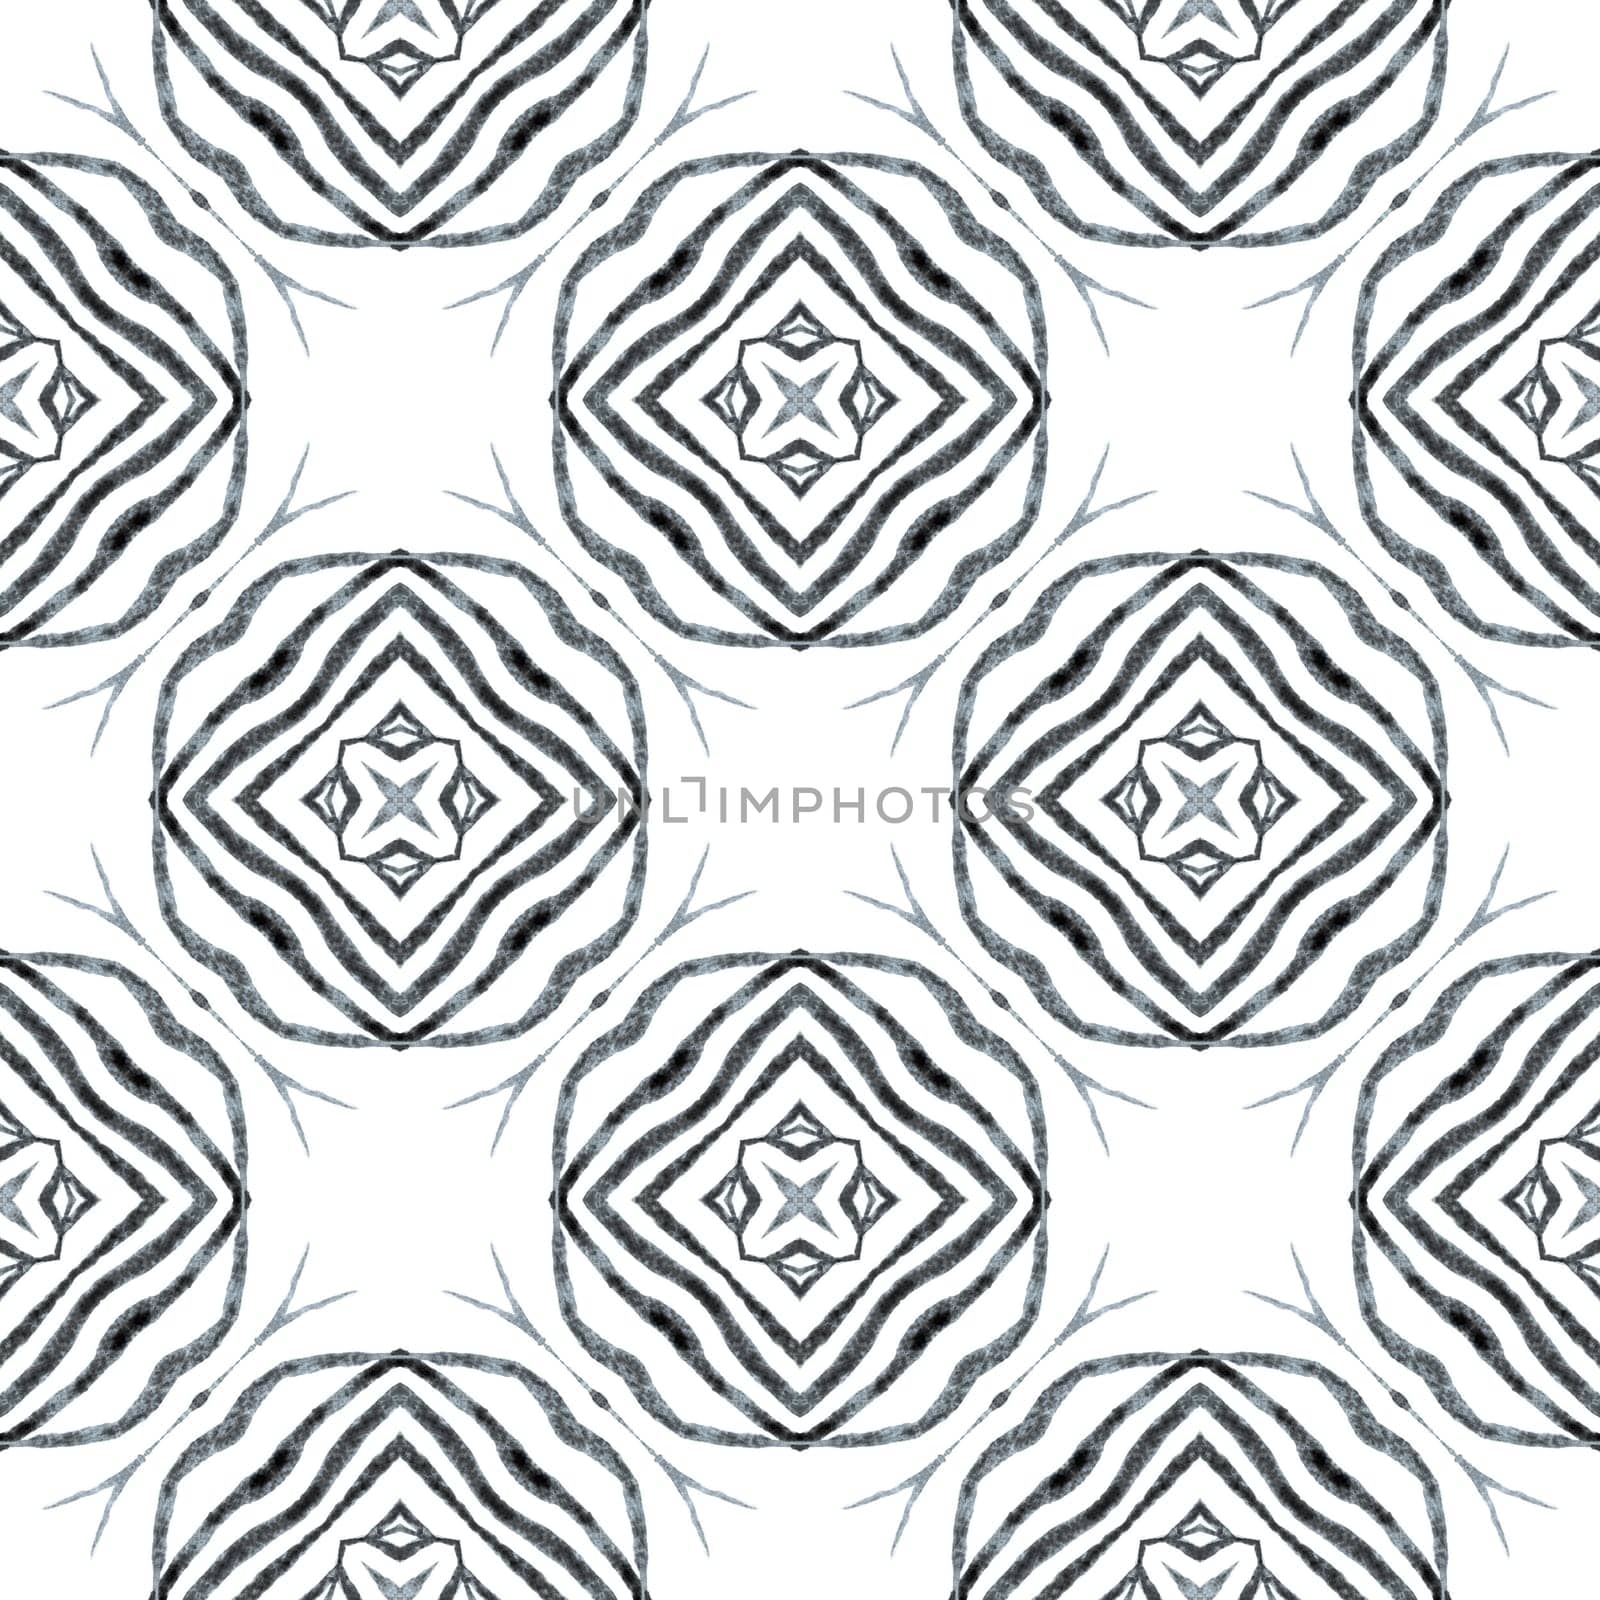 Tropical seamless pattern. Black and white bewitching boho chic summer design. Textile ready incredible print, swimwear fabric, wallpaper, wrapping. Hand drawn tropical seamless border.